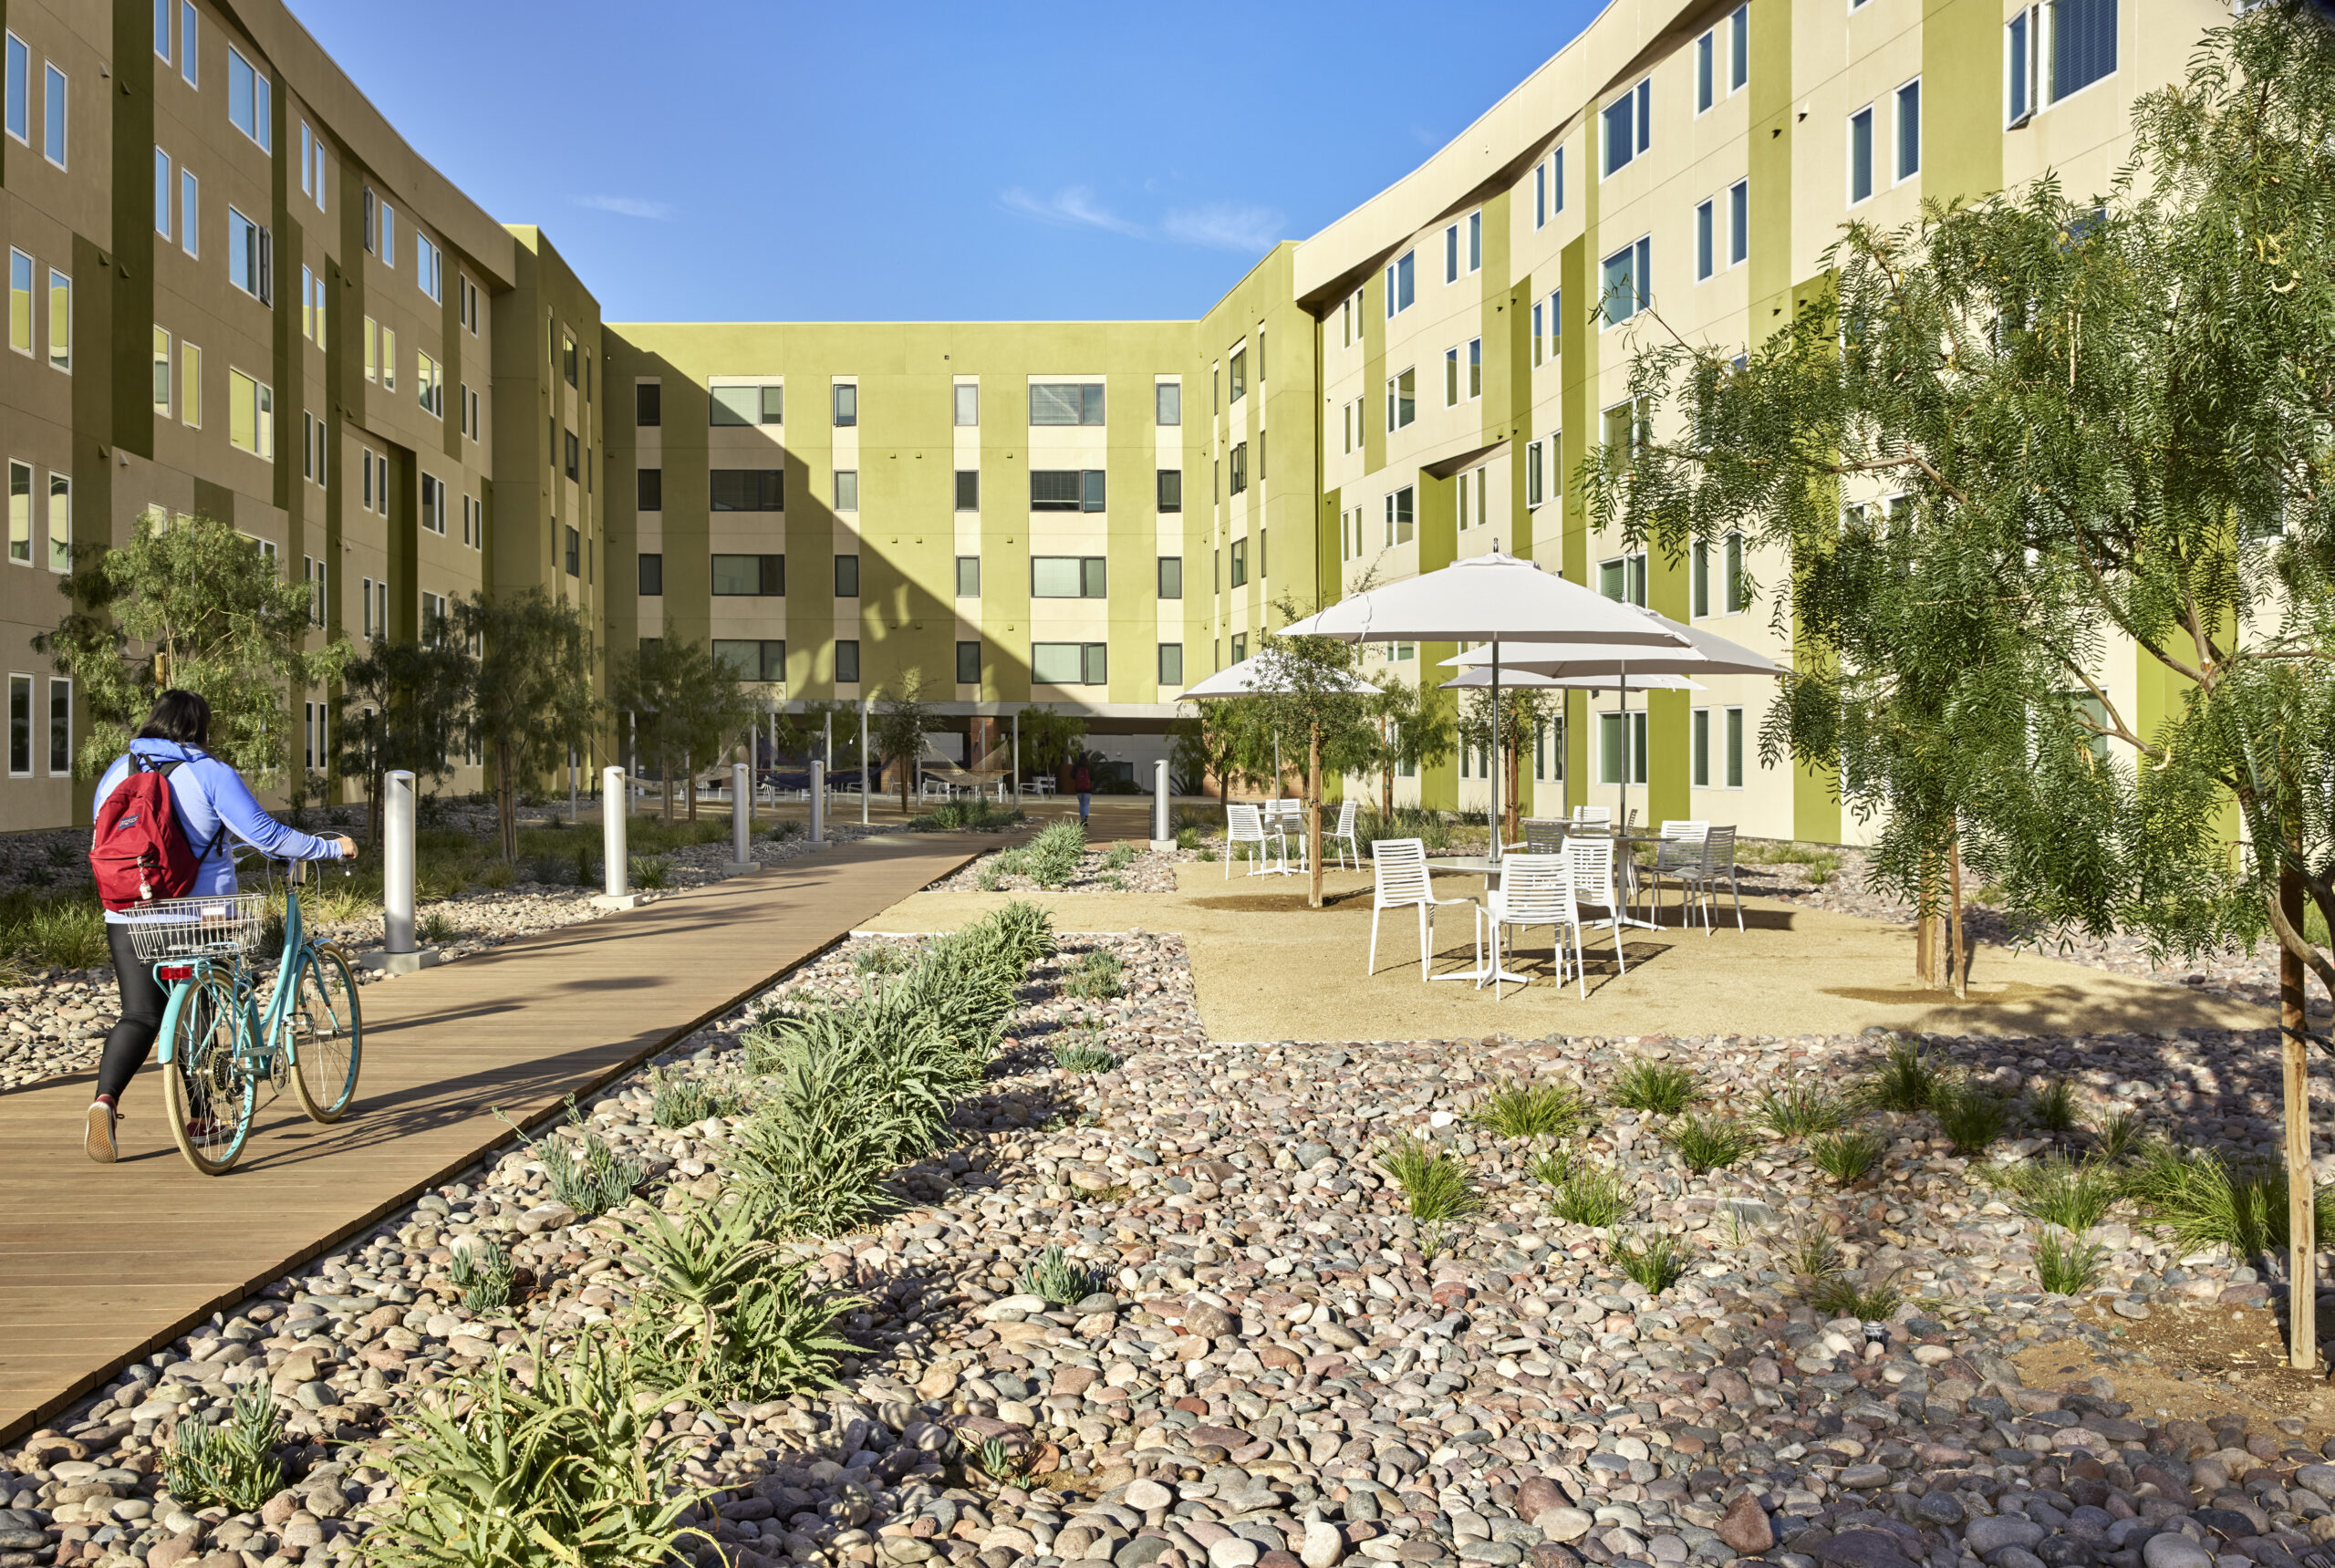 Courtyard at SCB's North District. Architecture. Campus Environments. Campus Life. Student Residential.